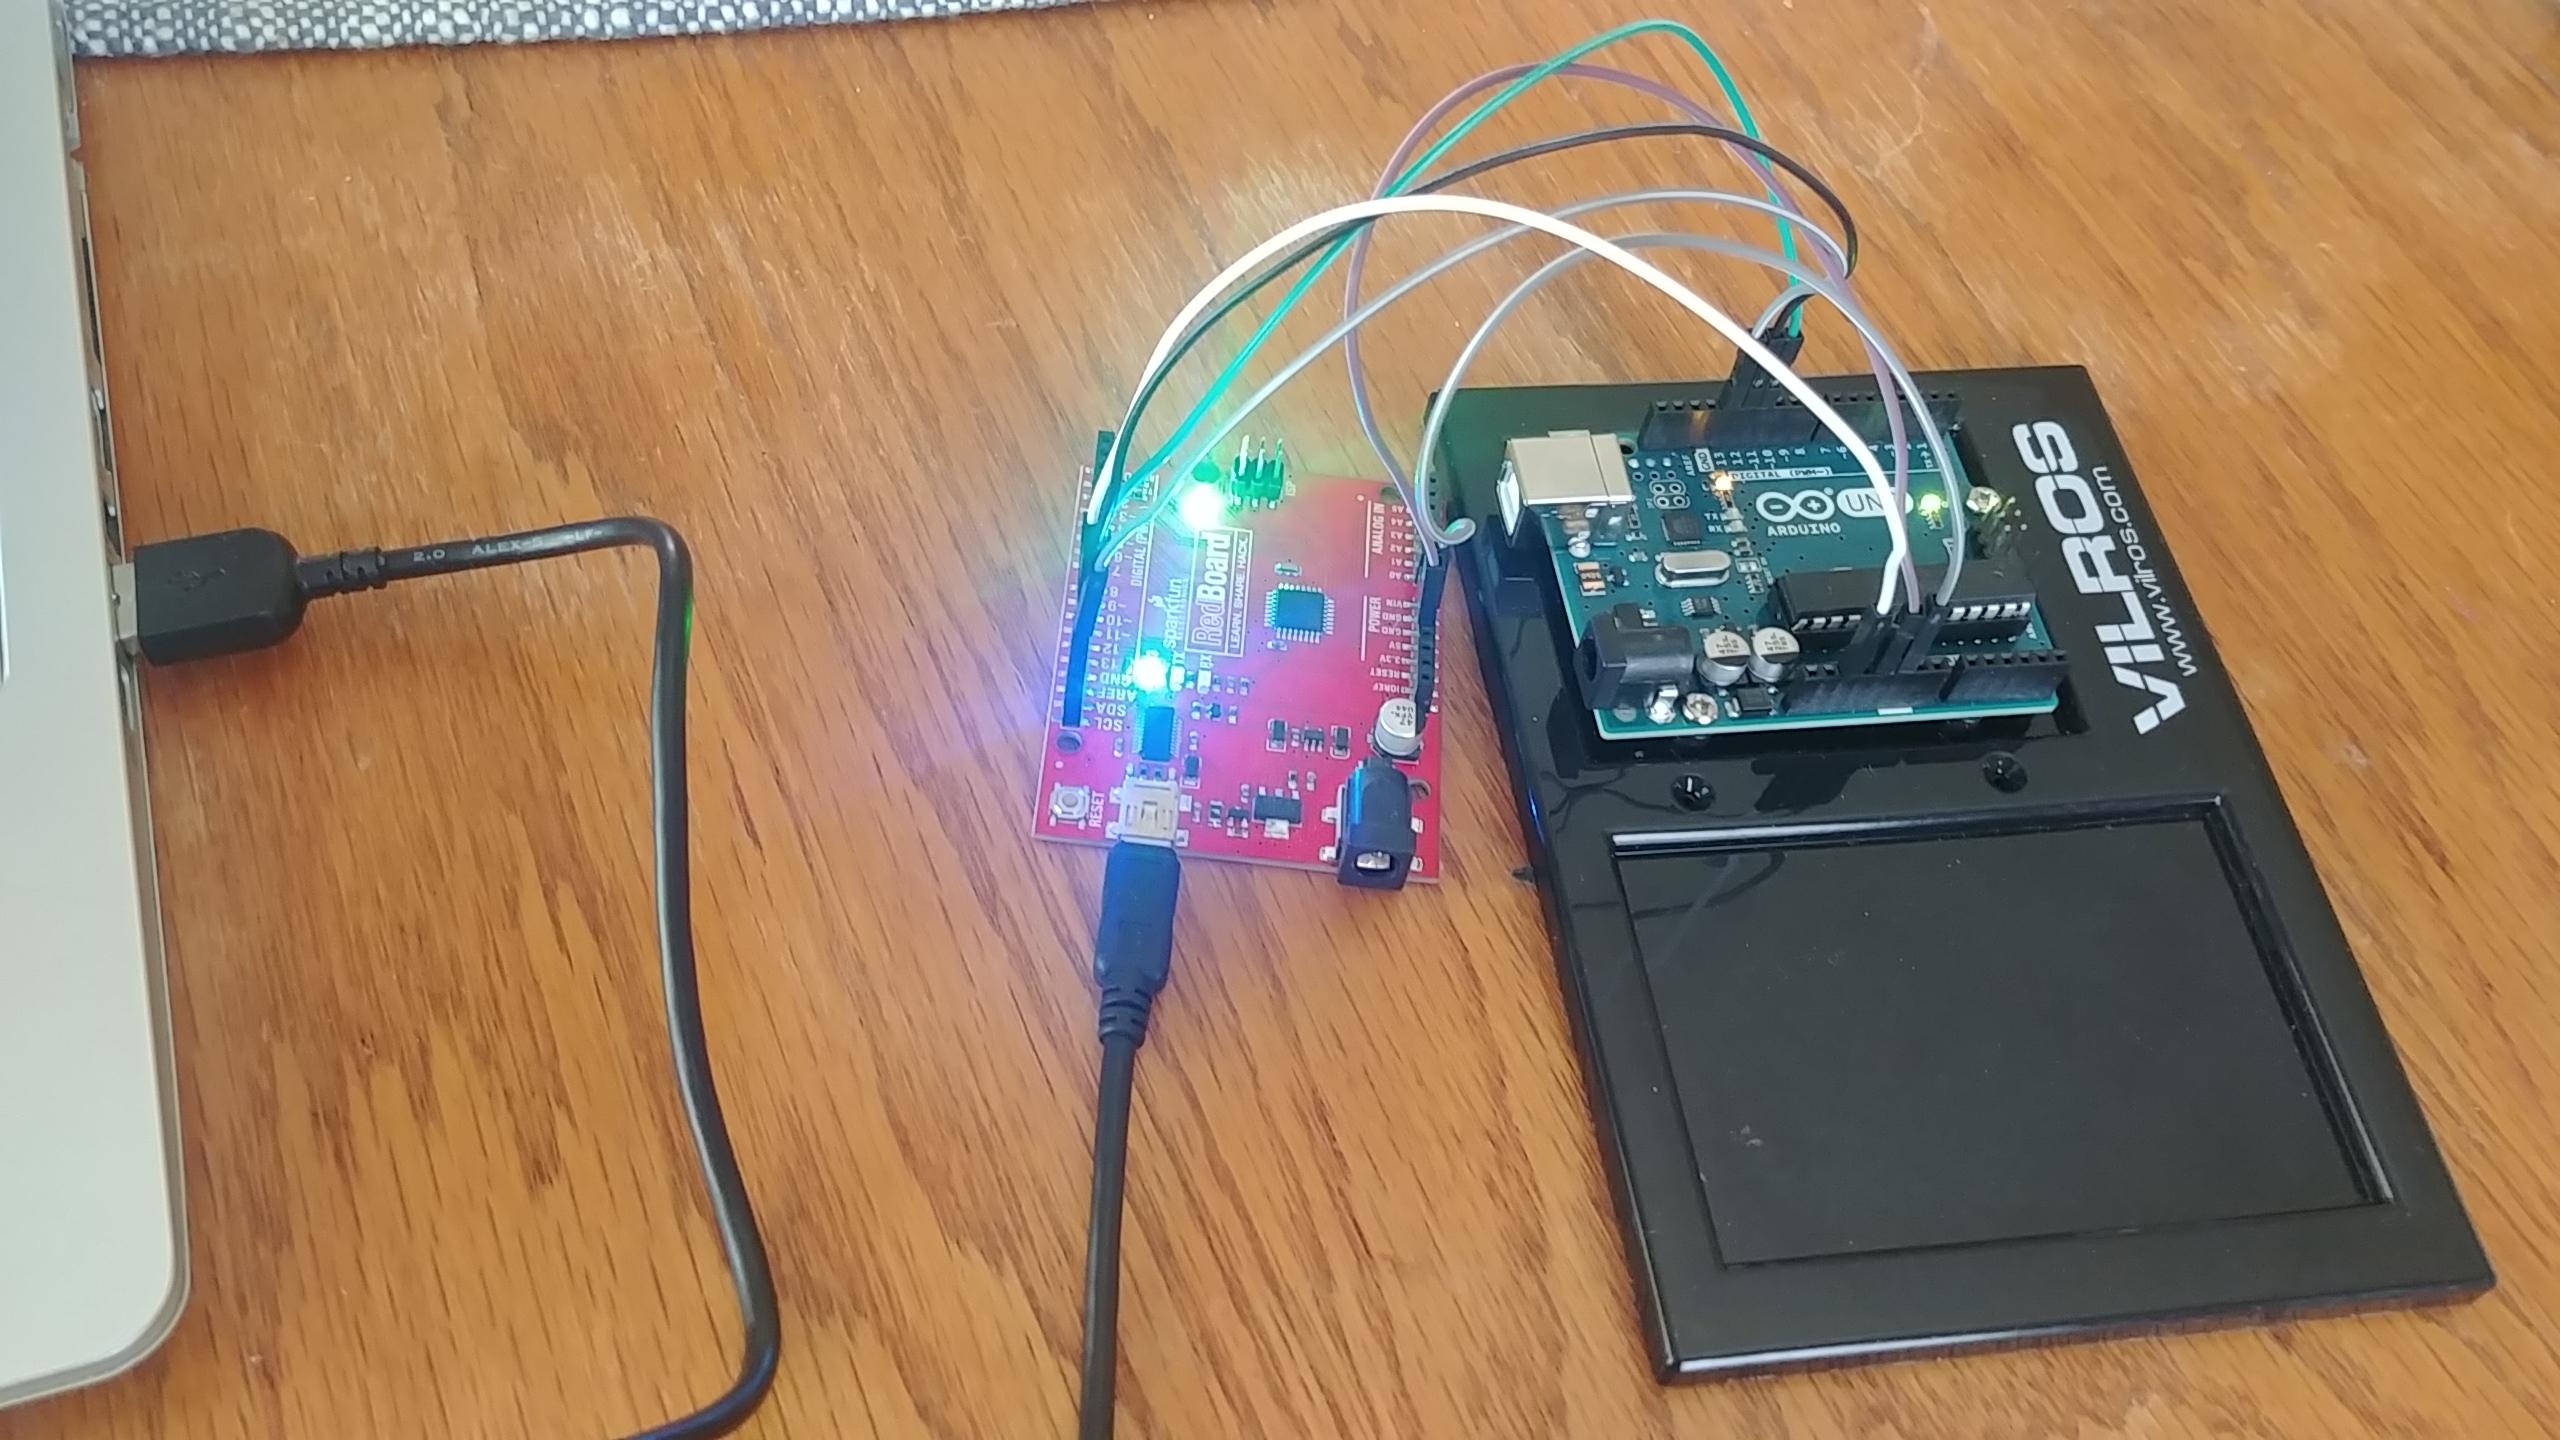 The newly made ISP redboard, connected directly to the Arduino Uno